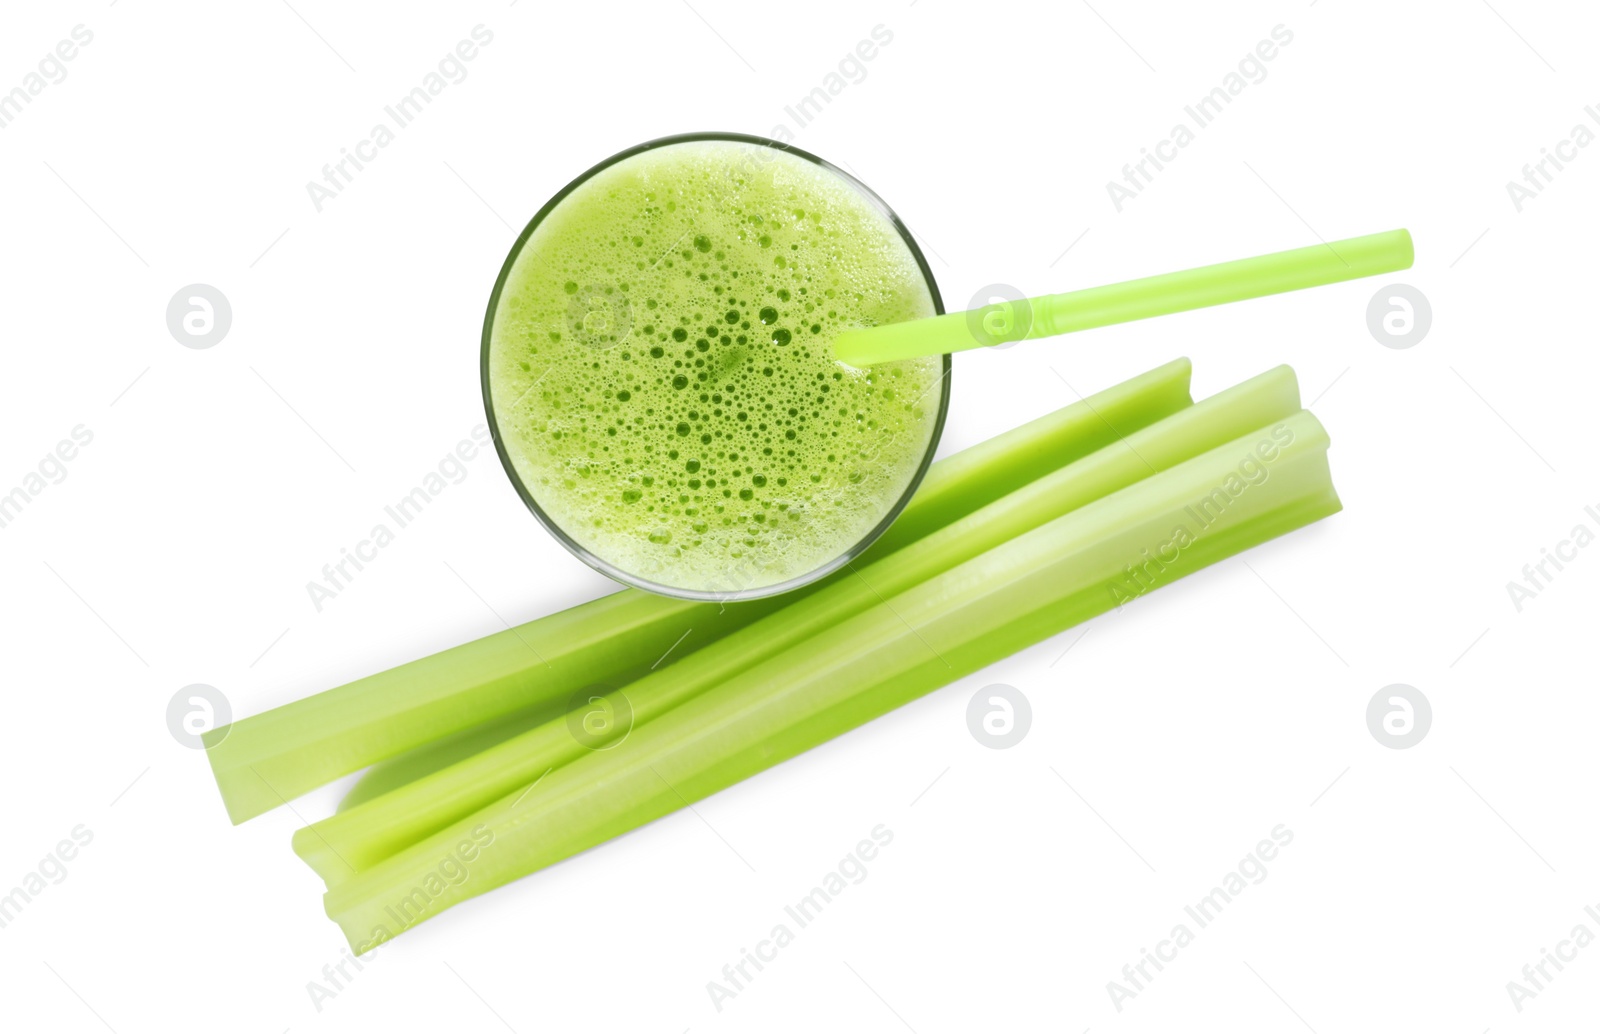 Photo of Glass of celery juice and fresh vegetable on white background, top view